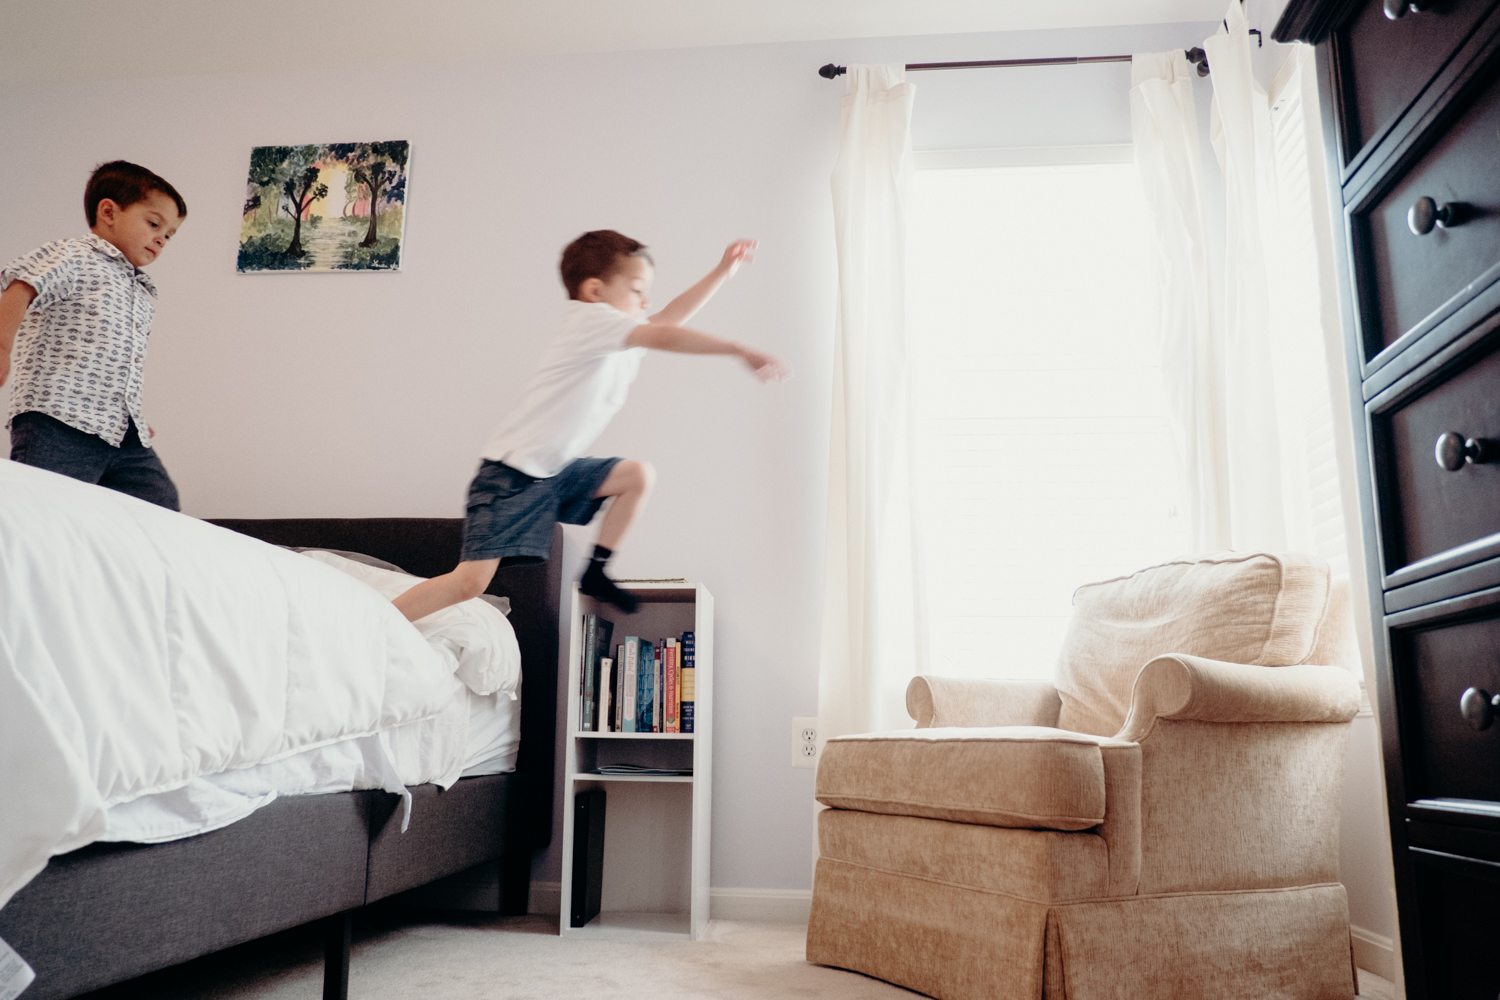 A little boy jumps off his parents bed onto a chair while his little brother watches.